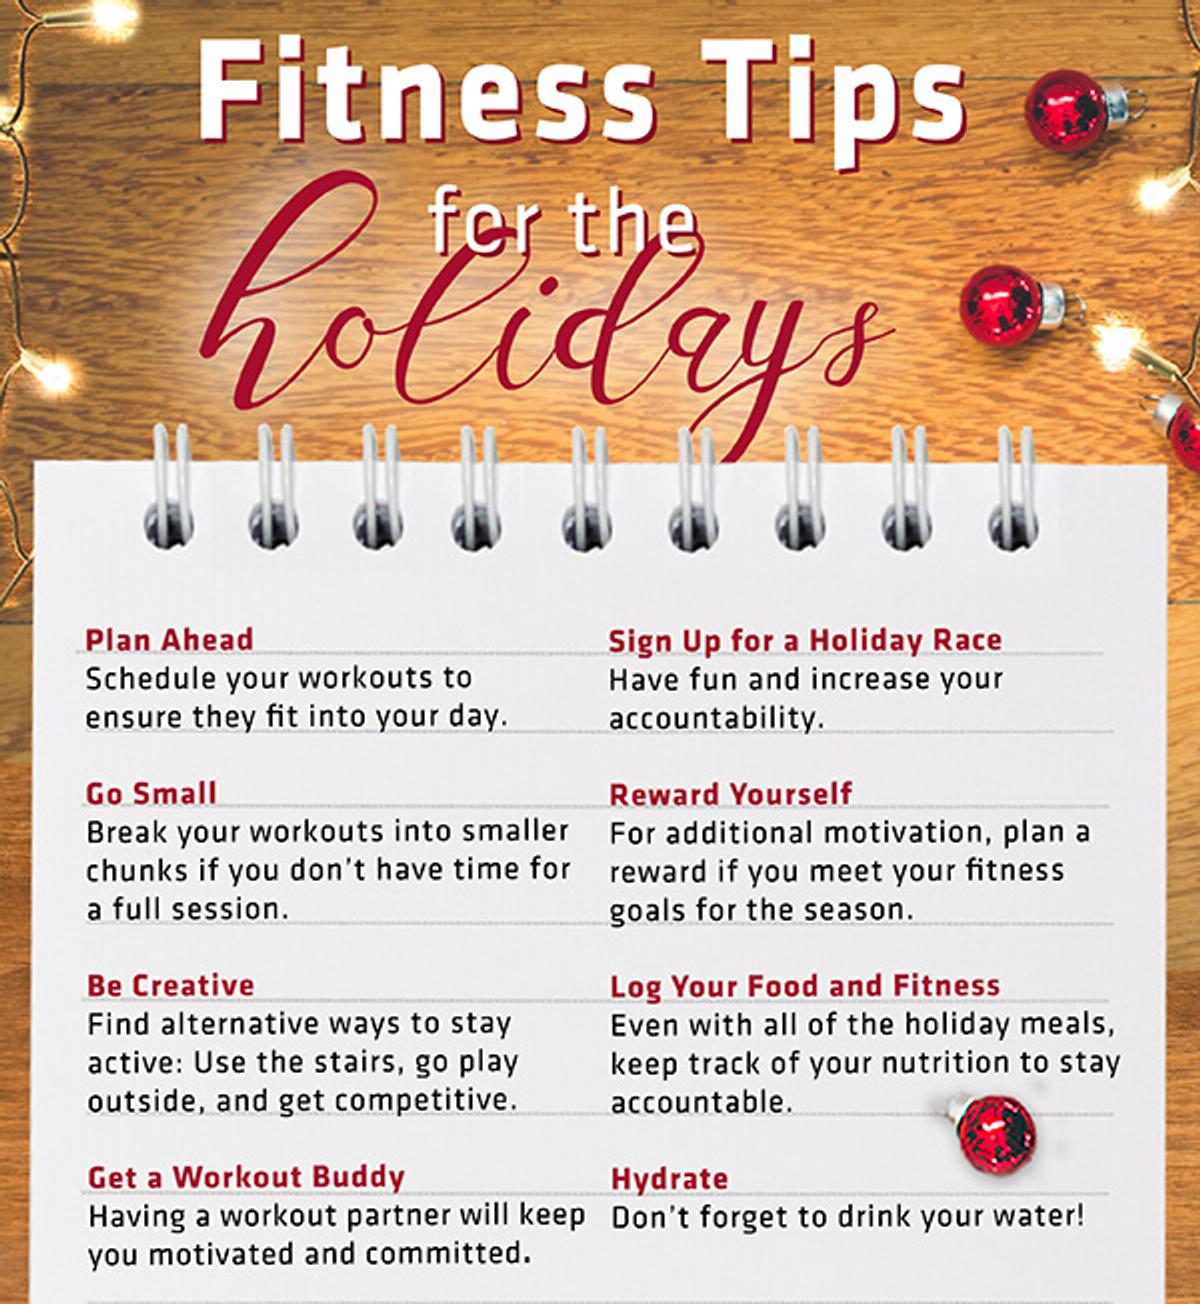 Fitness Tips for the Holidays